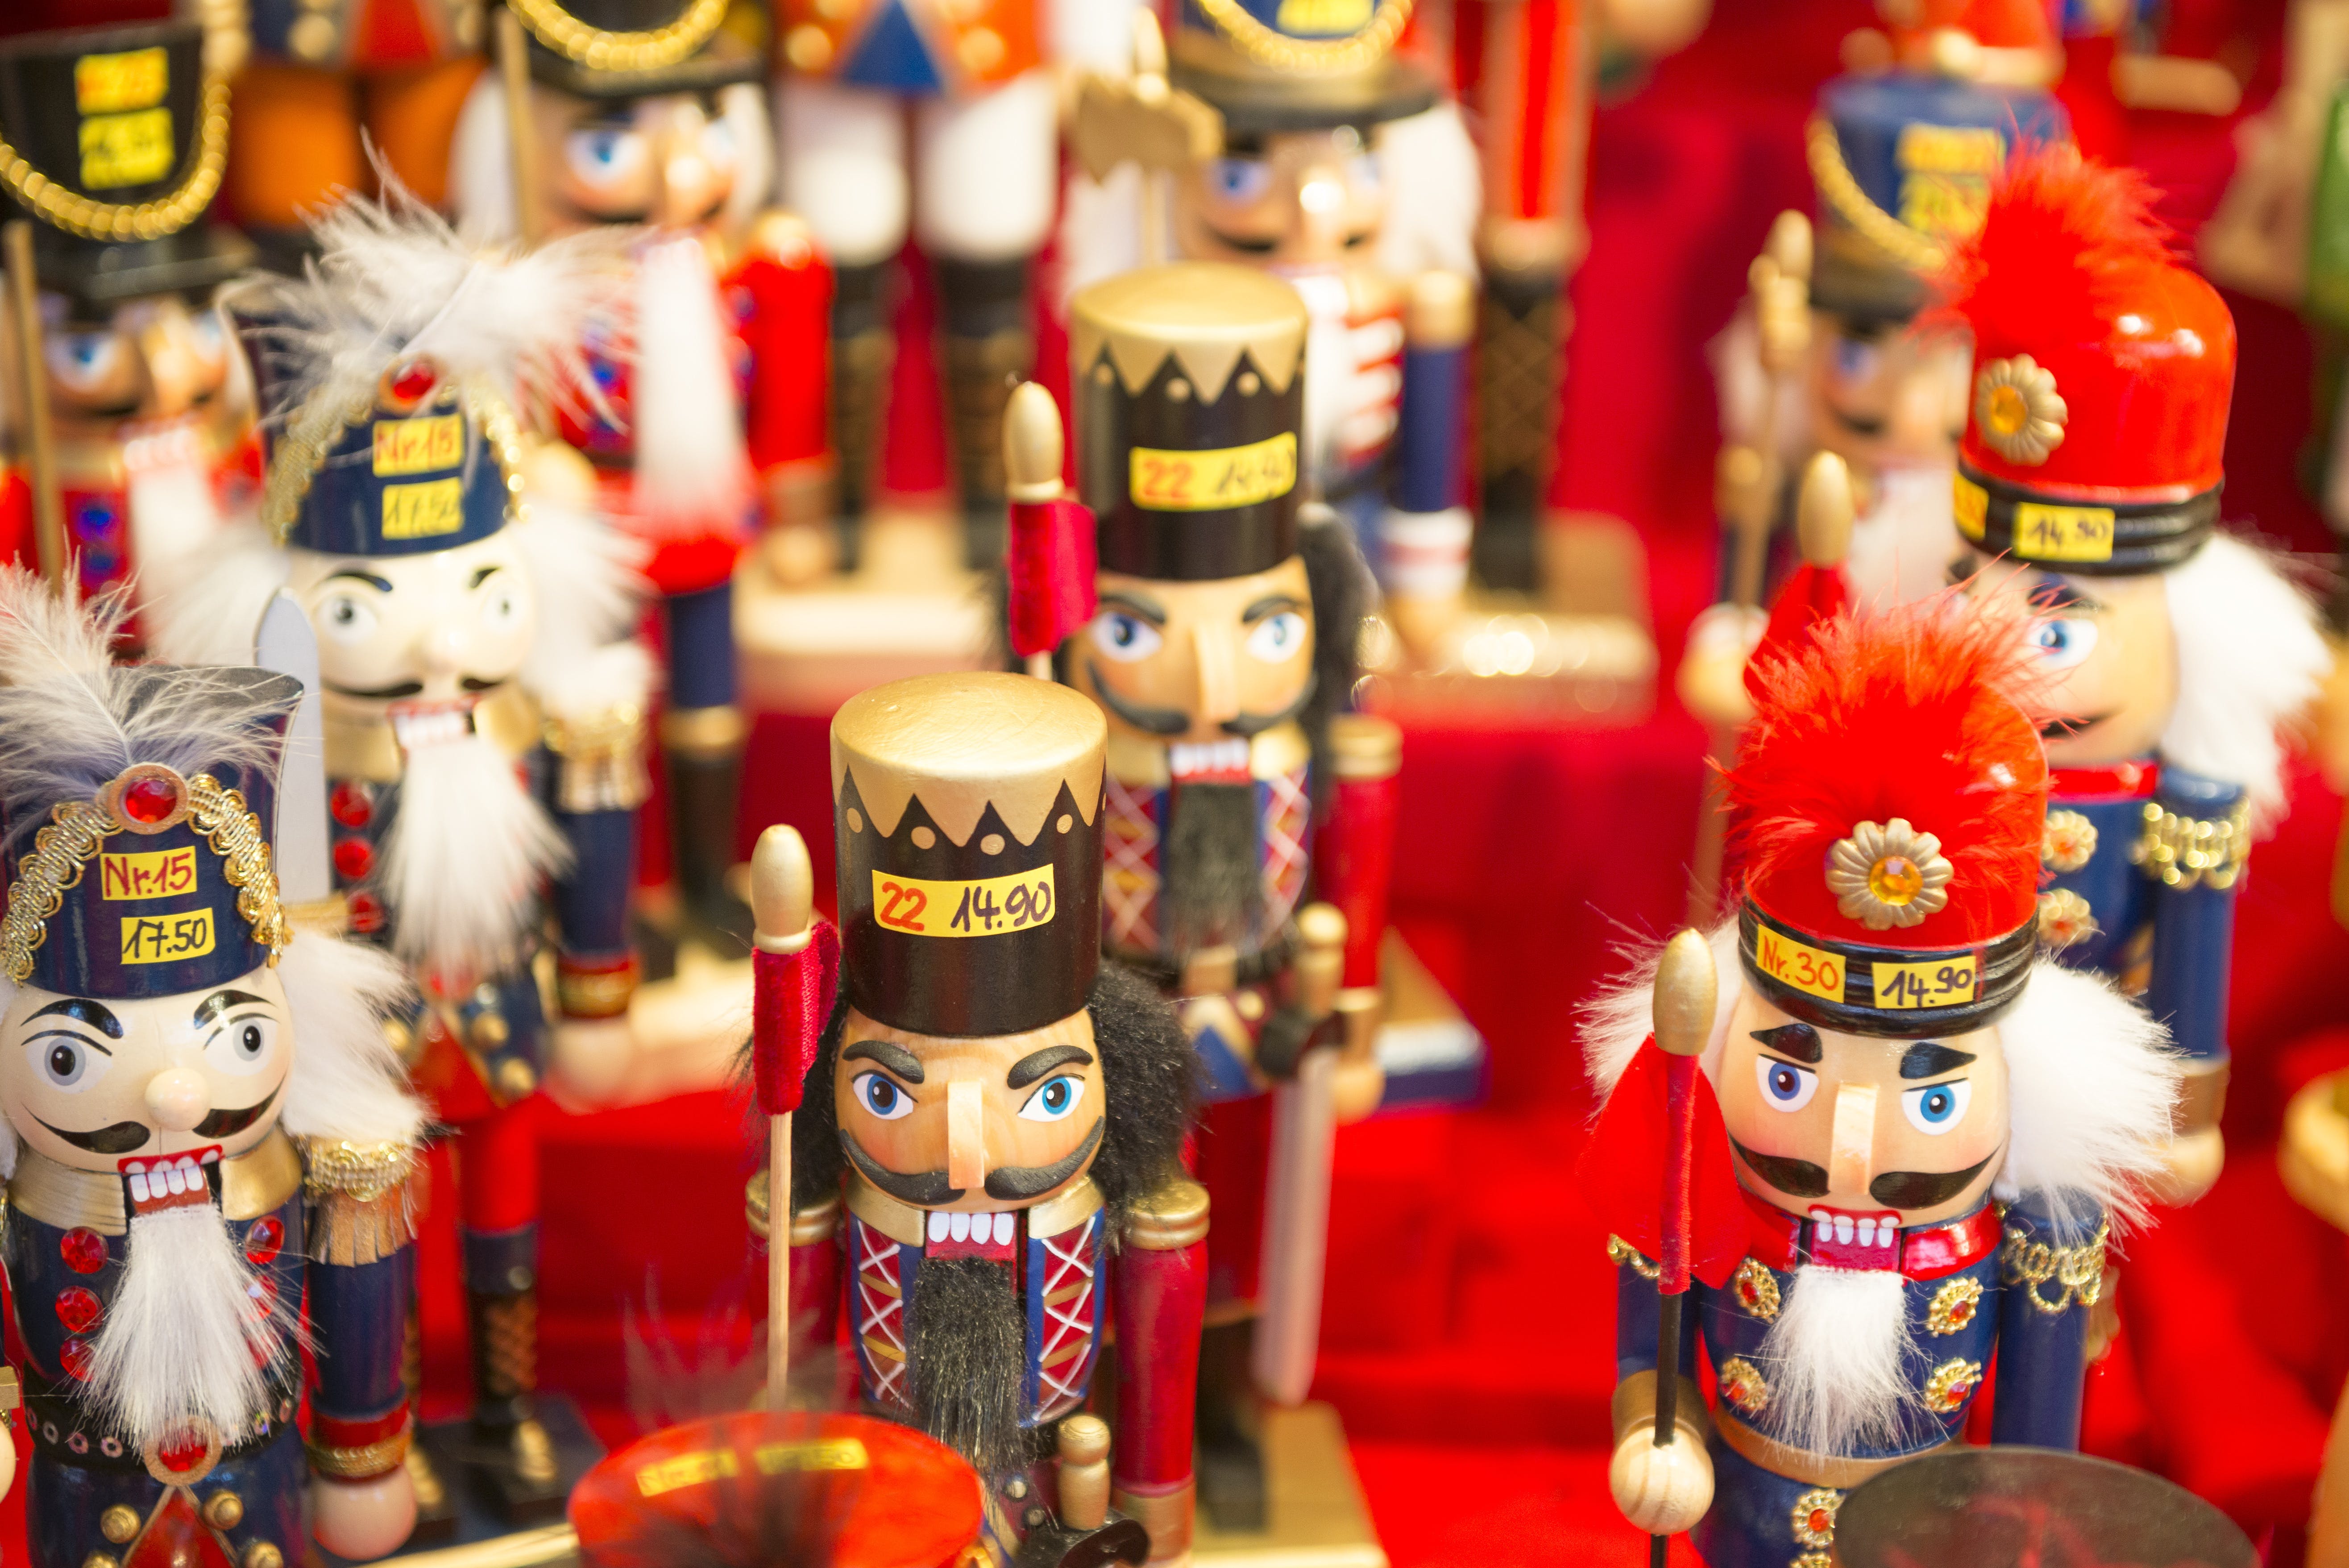 hand-carved wooden Bavarian nutcrackers, an iconic symbol of the Christmas season.